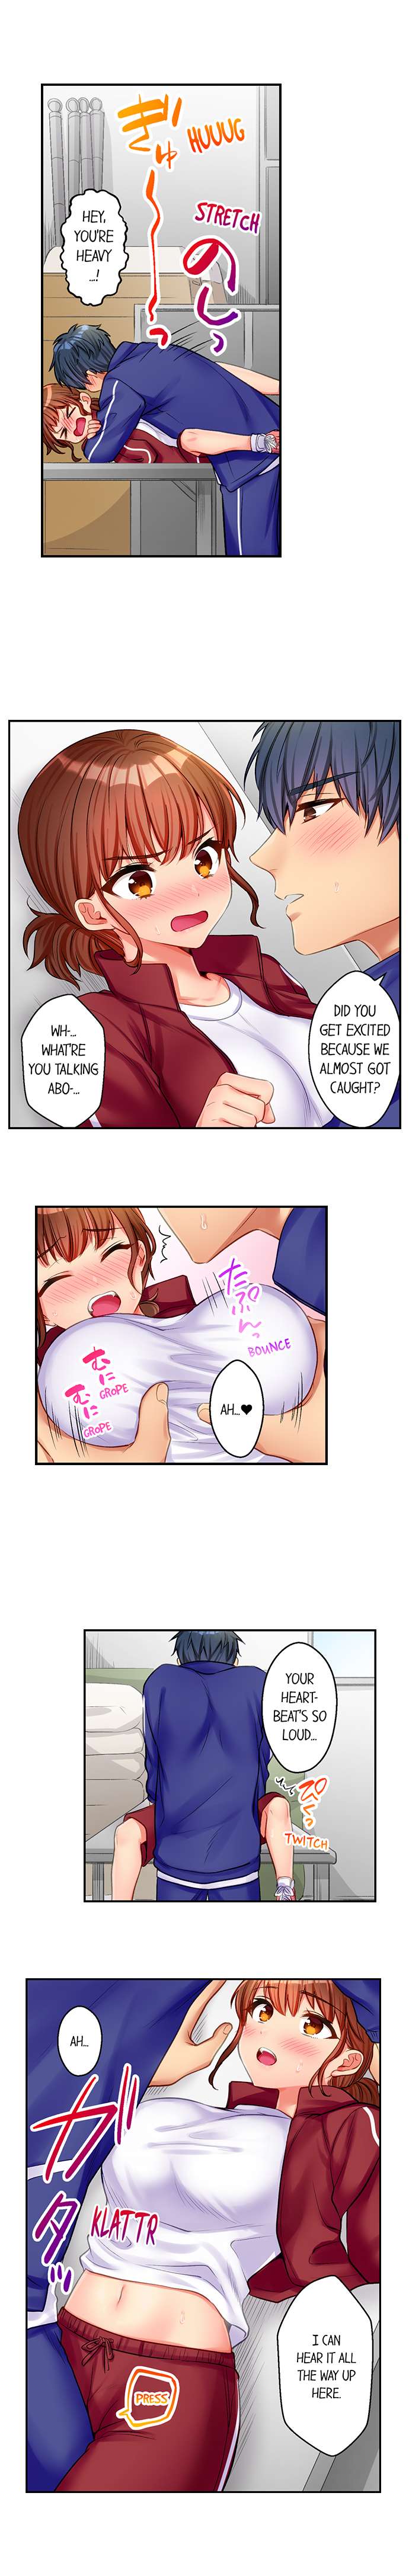 Sexy Times With My Tiny Childhood Friend - Chapter 5 Page 5